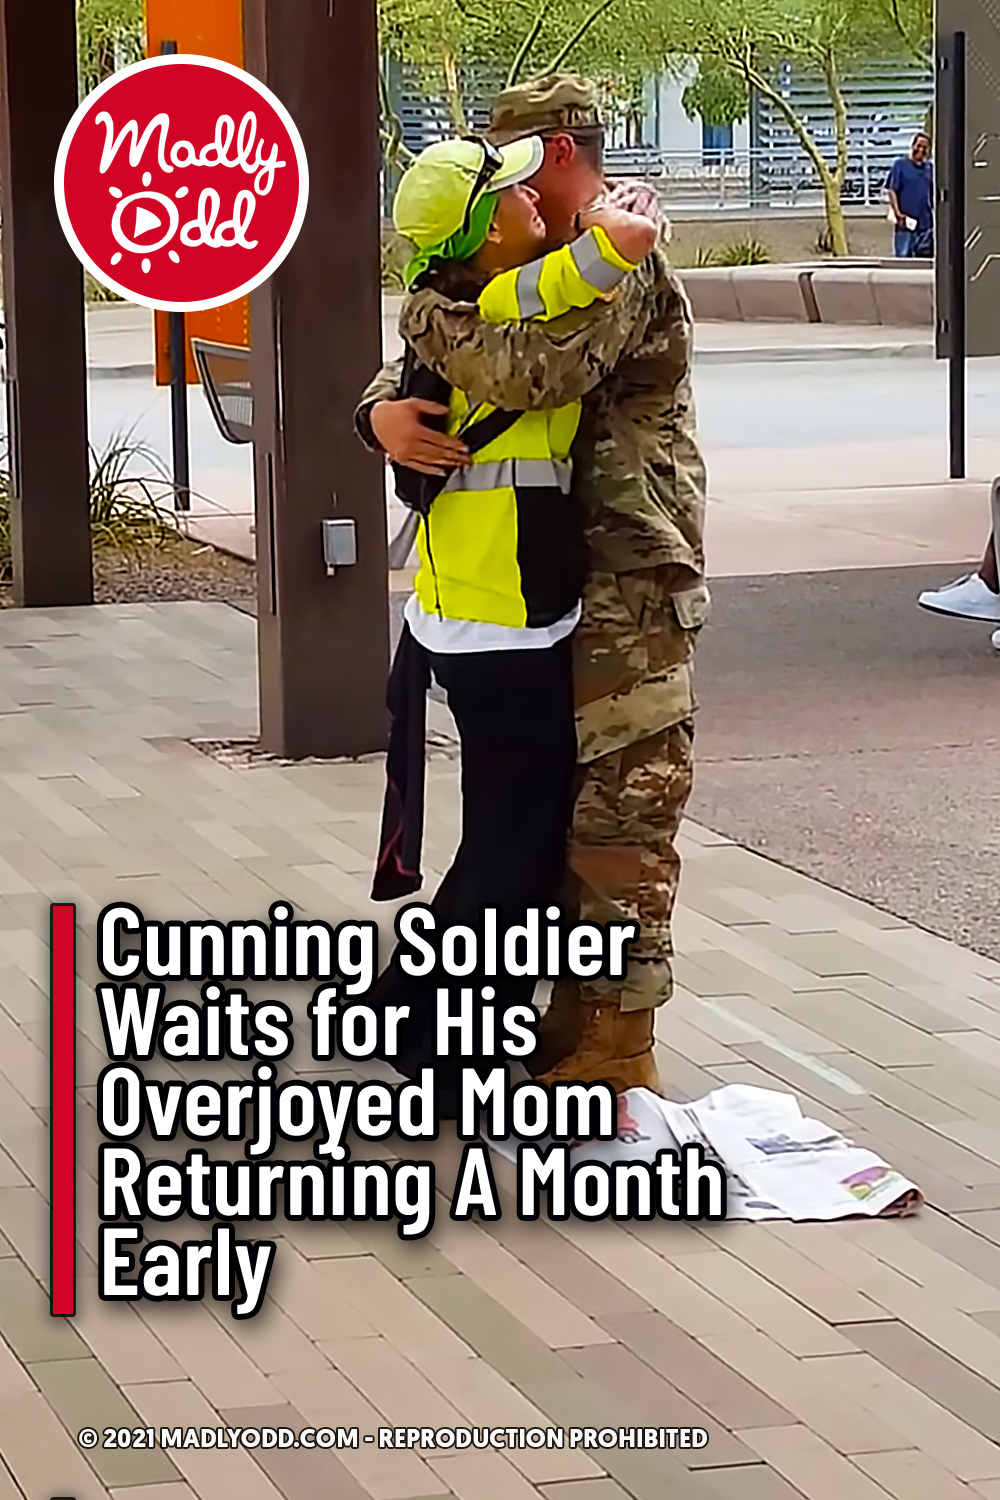 Cunning Soldier Waits for His Overjoyed Mom Returning A Month Early